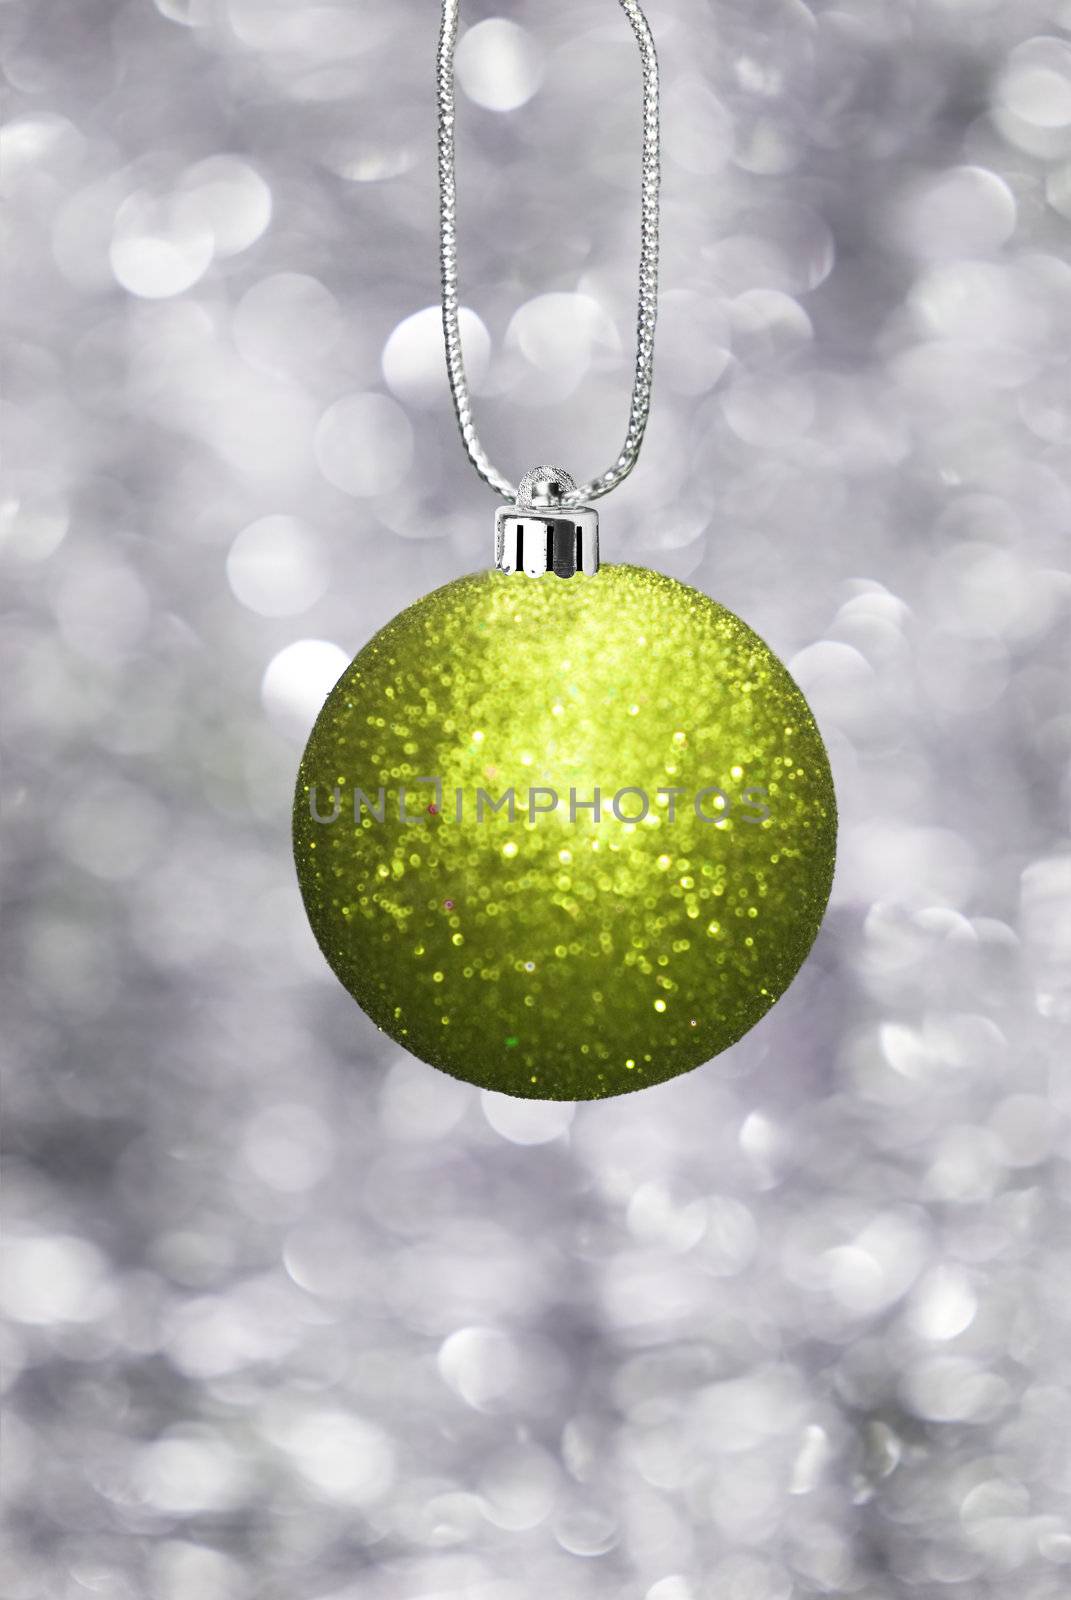 Christmas ball with festive background by tish1